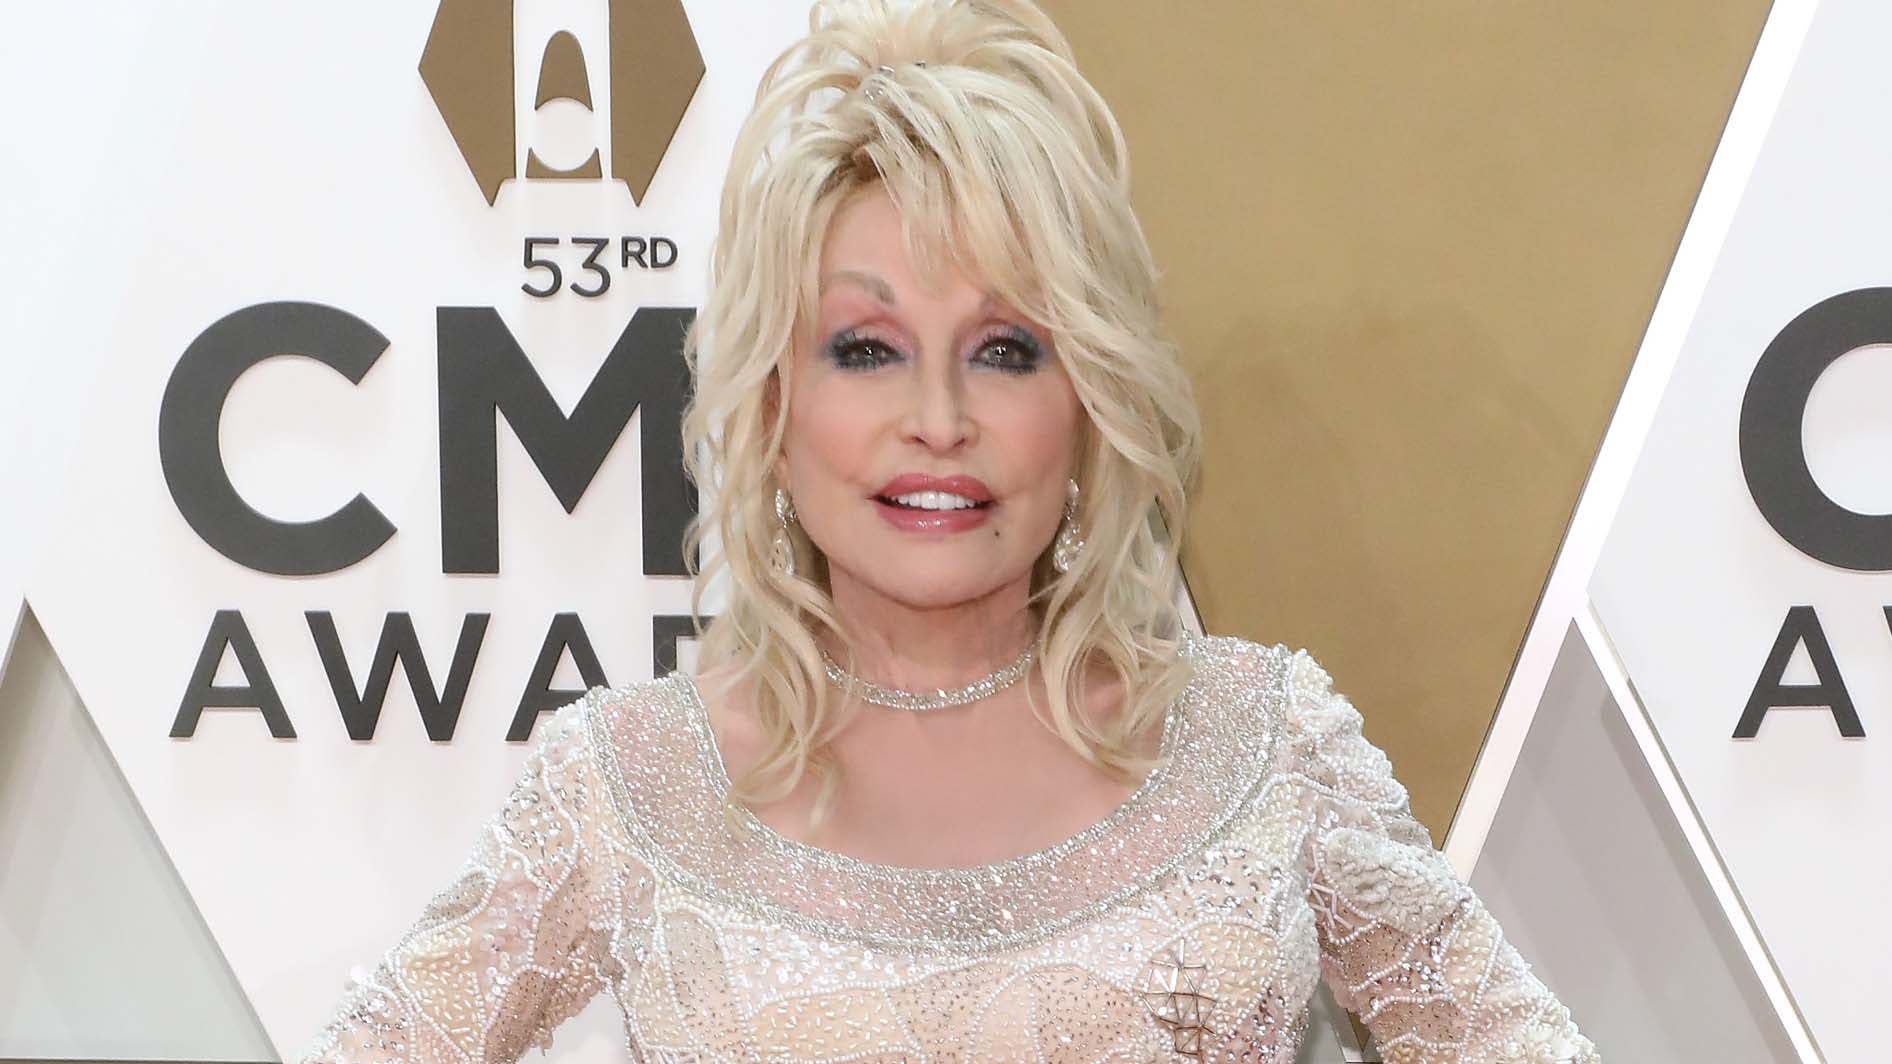 Does Dolly Parton Wear Long Sleeves To Cover Snake Tattoos